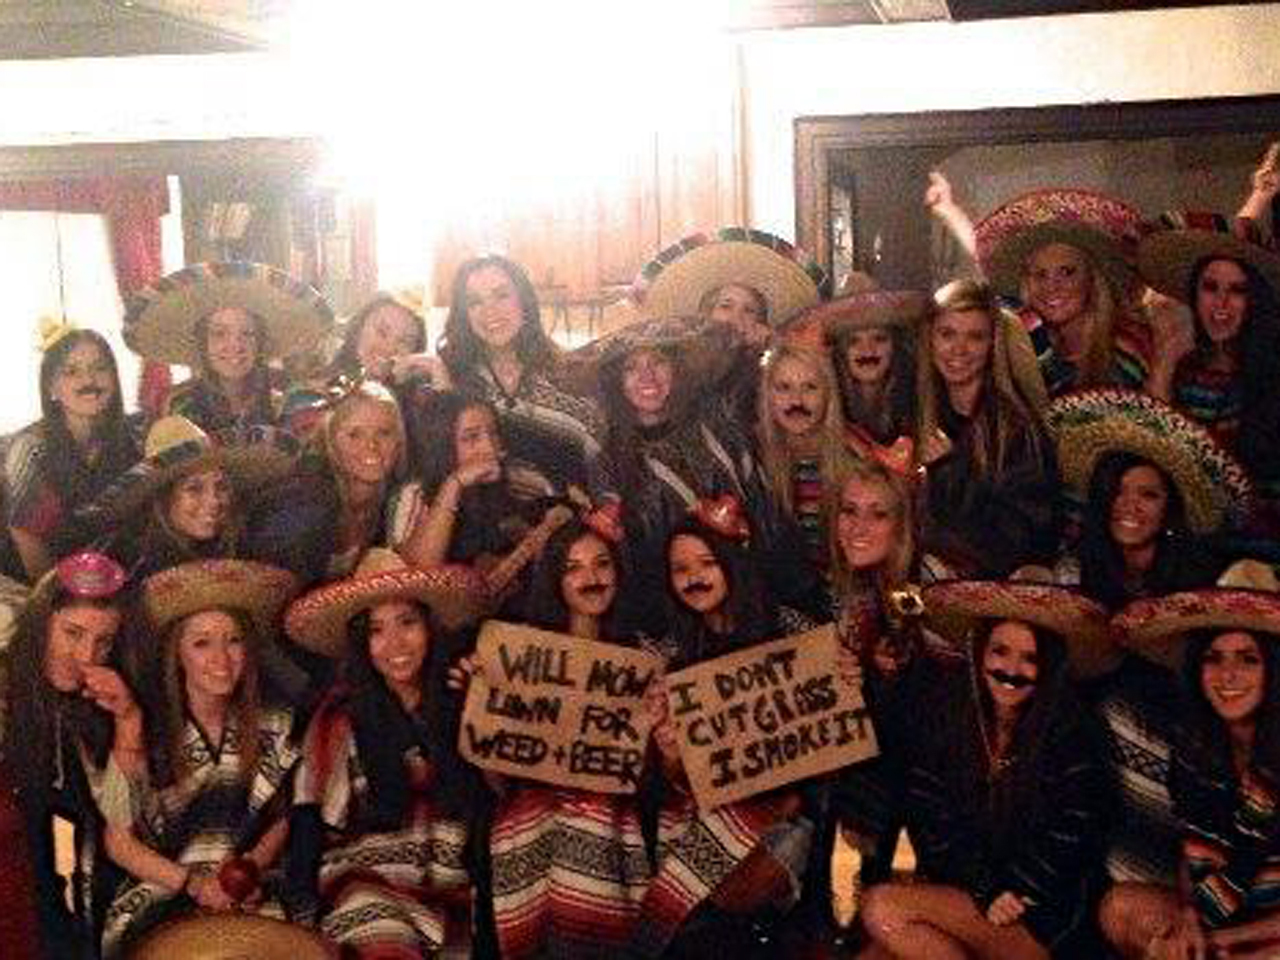 Penn State Sorority Chi Omega Put On Probation For Offensive Picture Cbs News